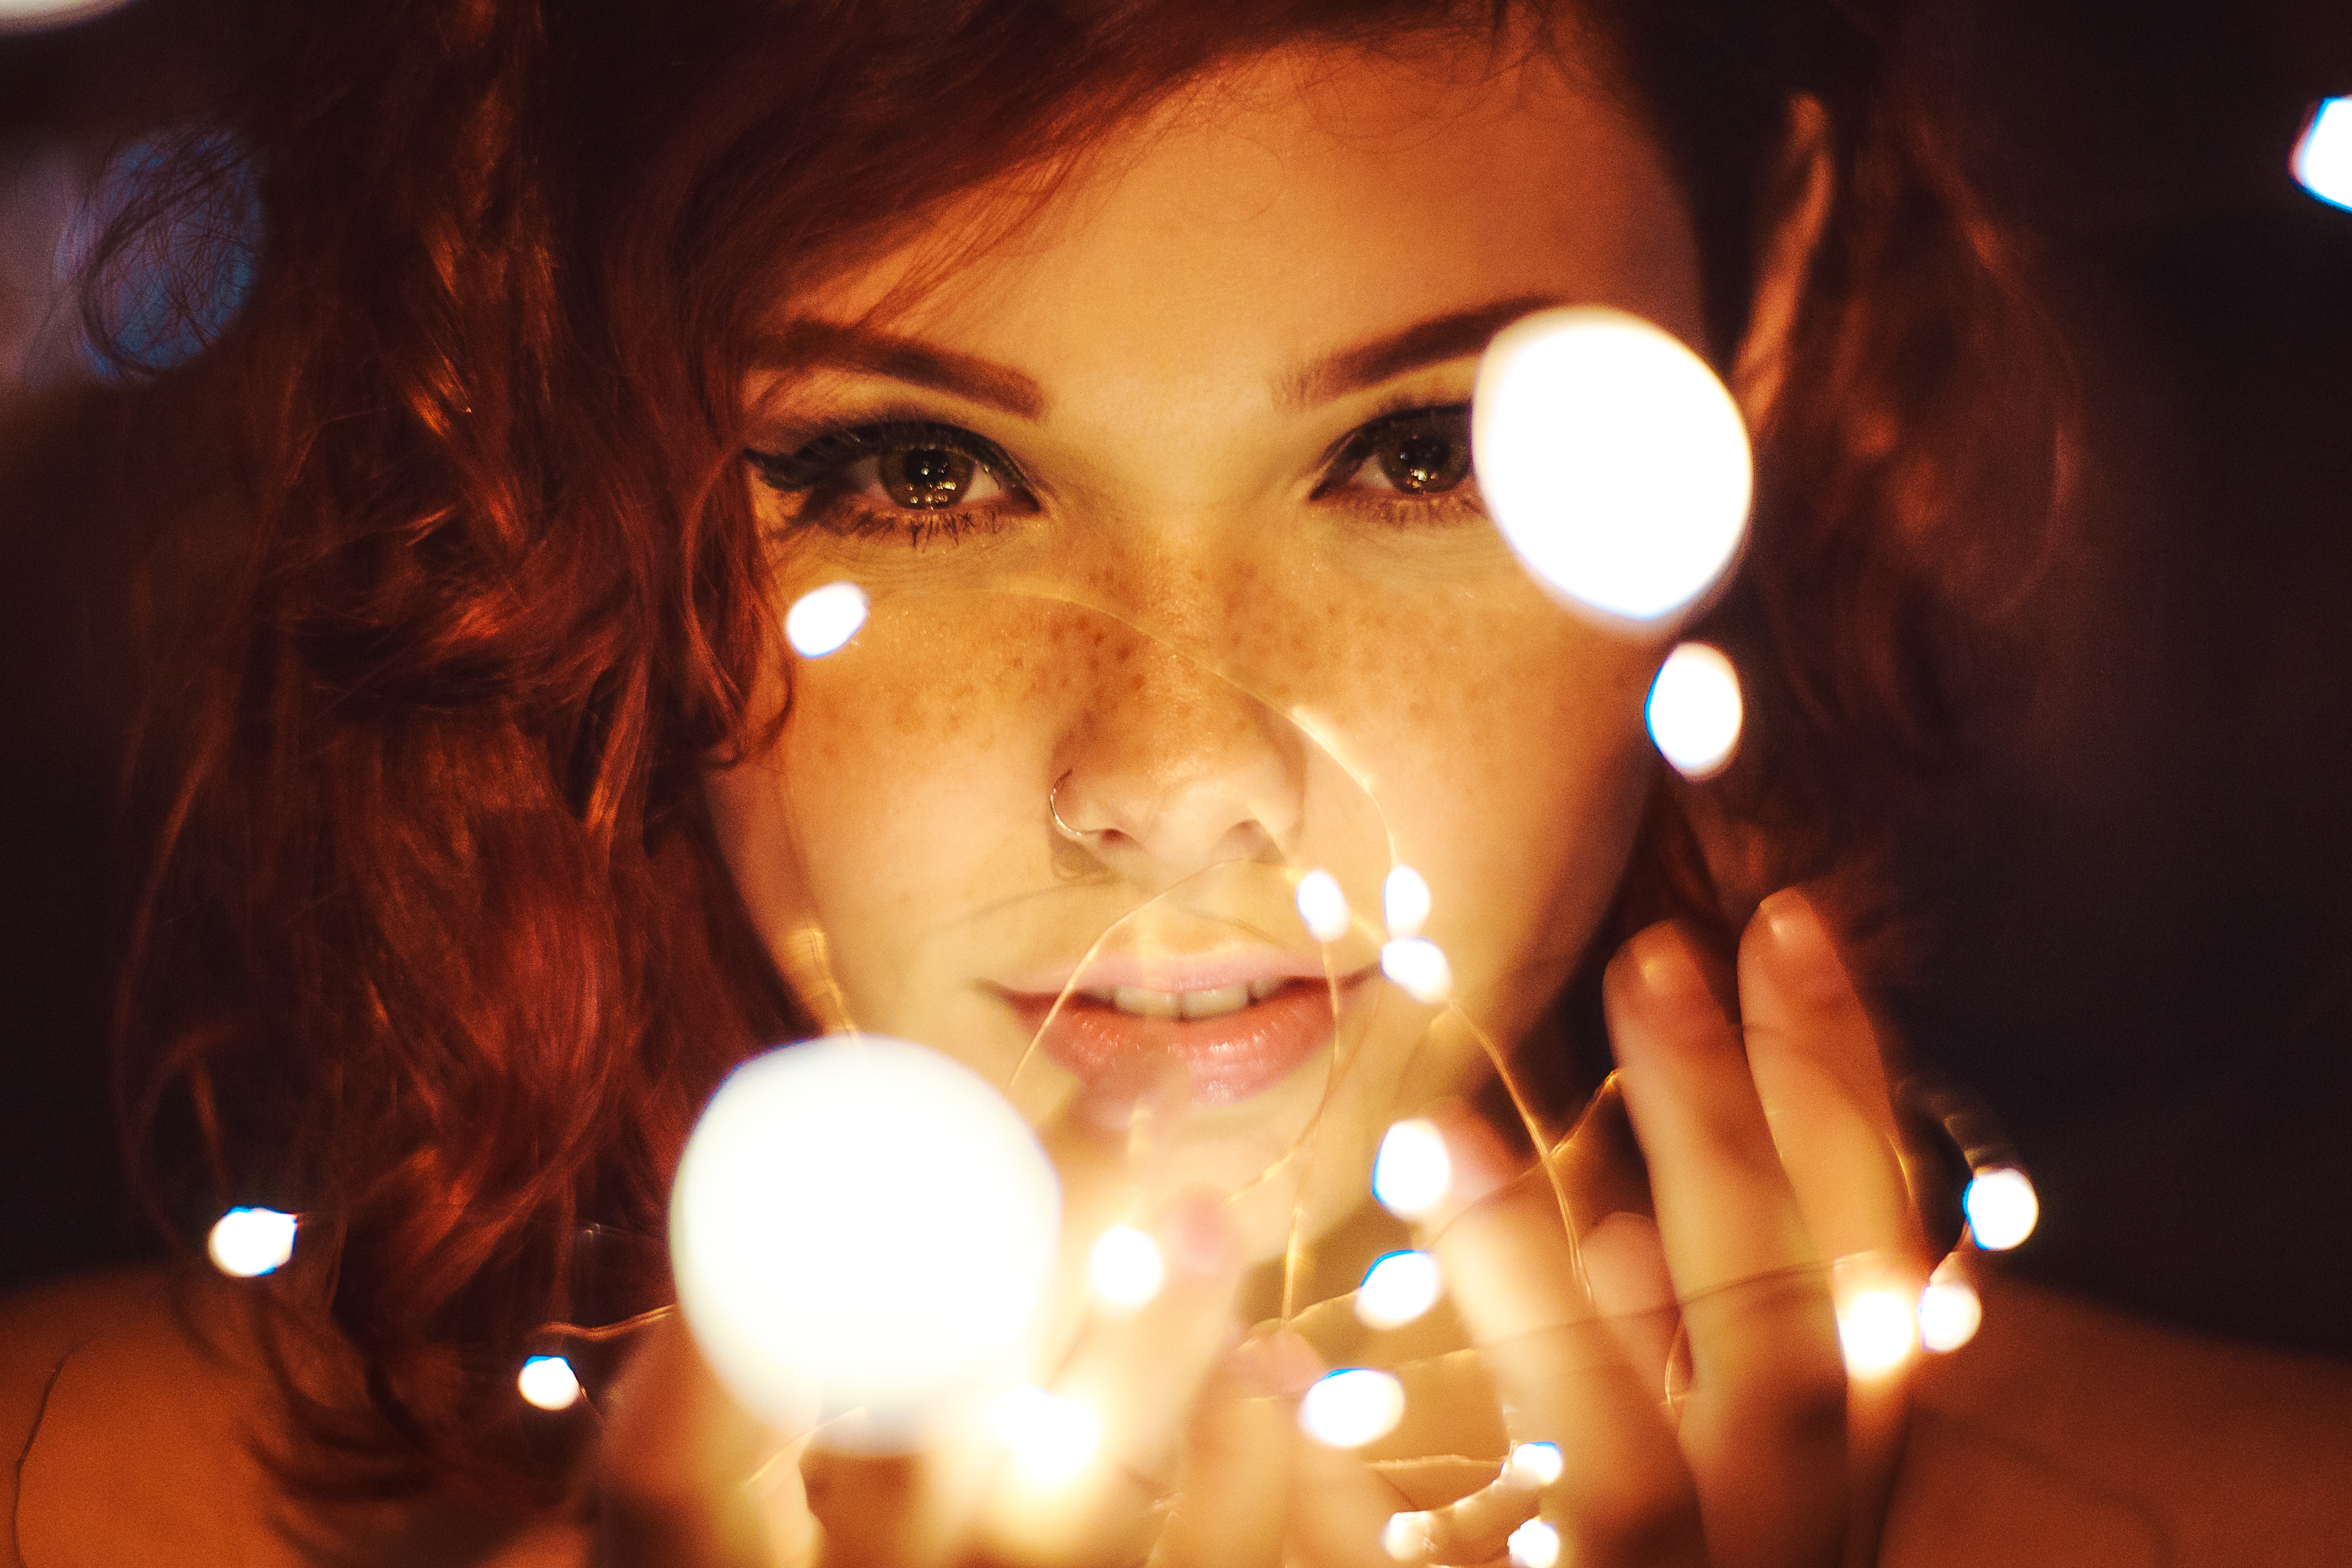 Photography of a woman holding lights